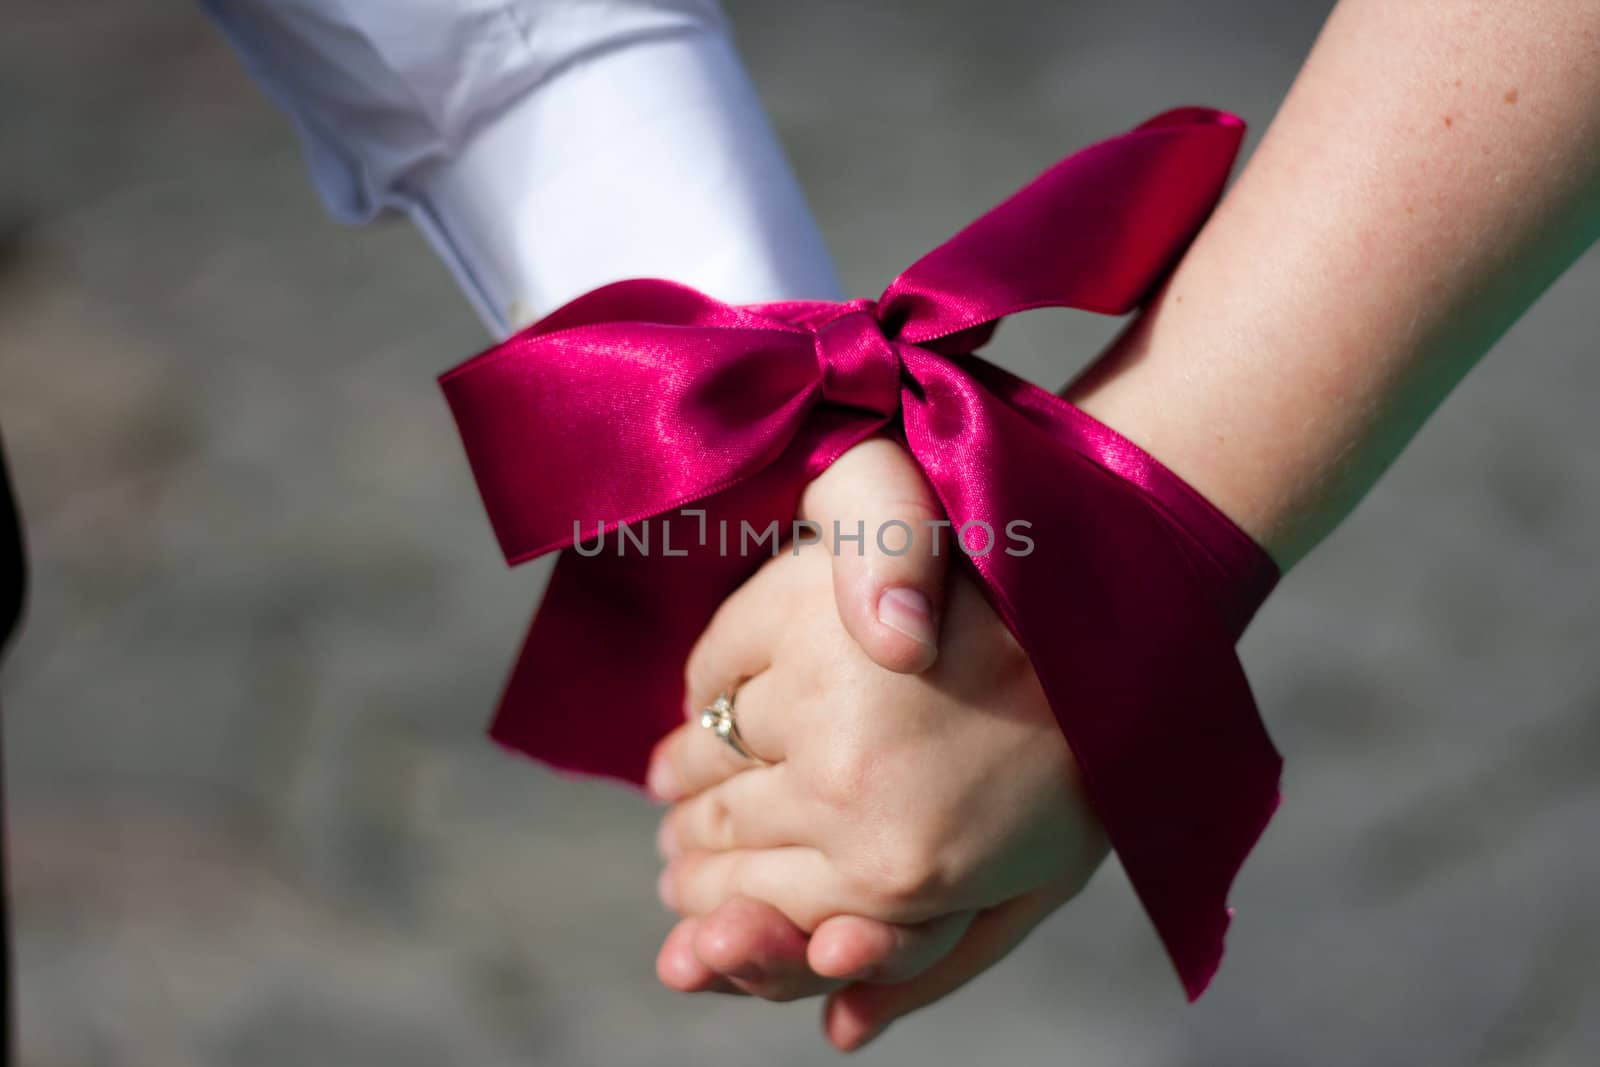 Hands of women and men are associated with red ribbon by victosha